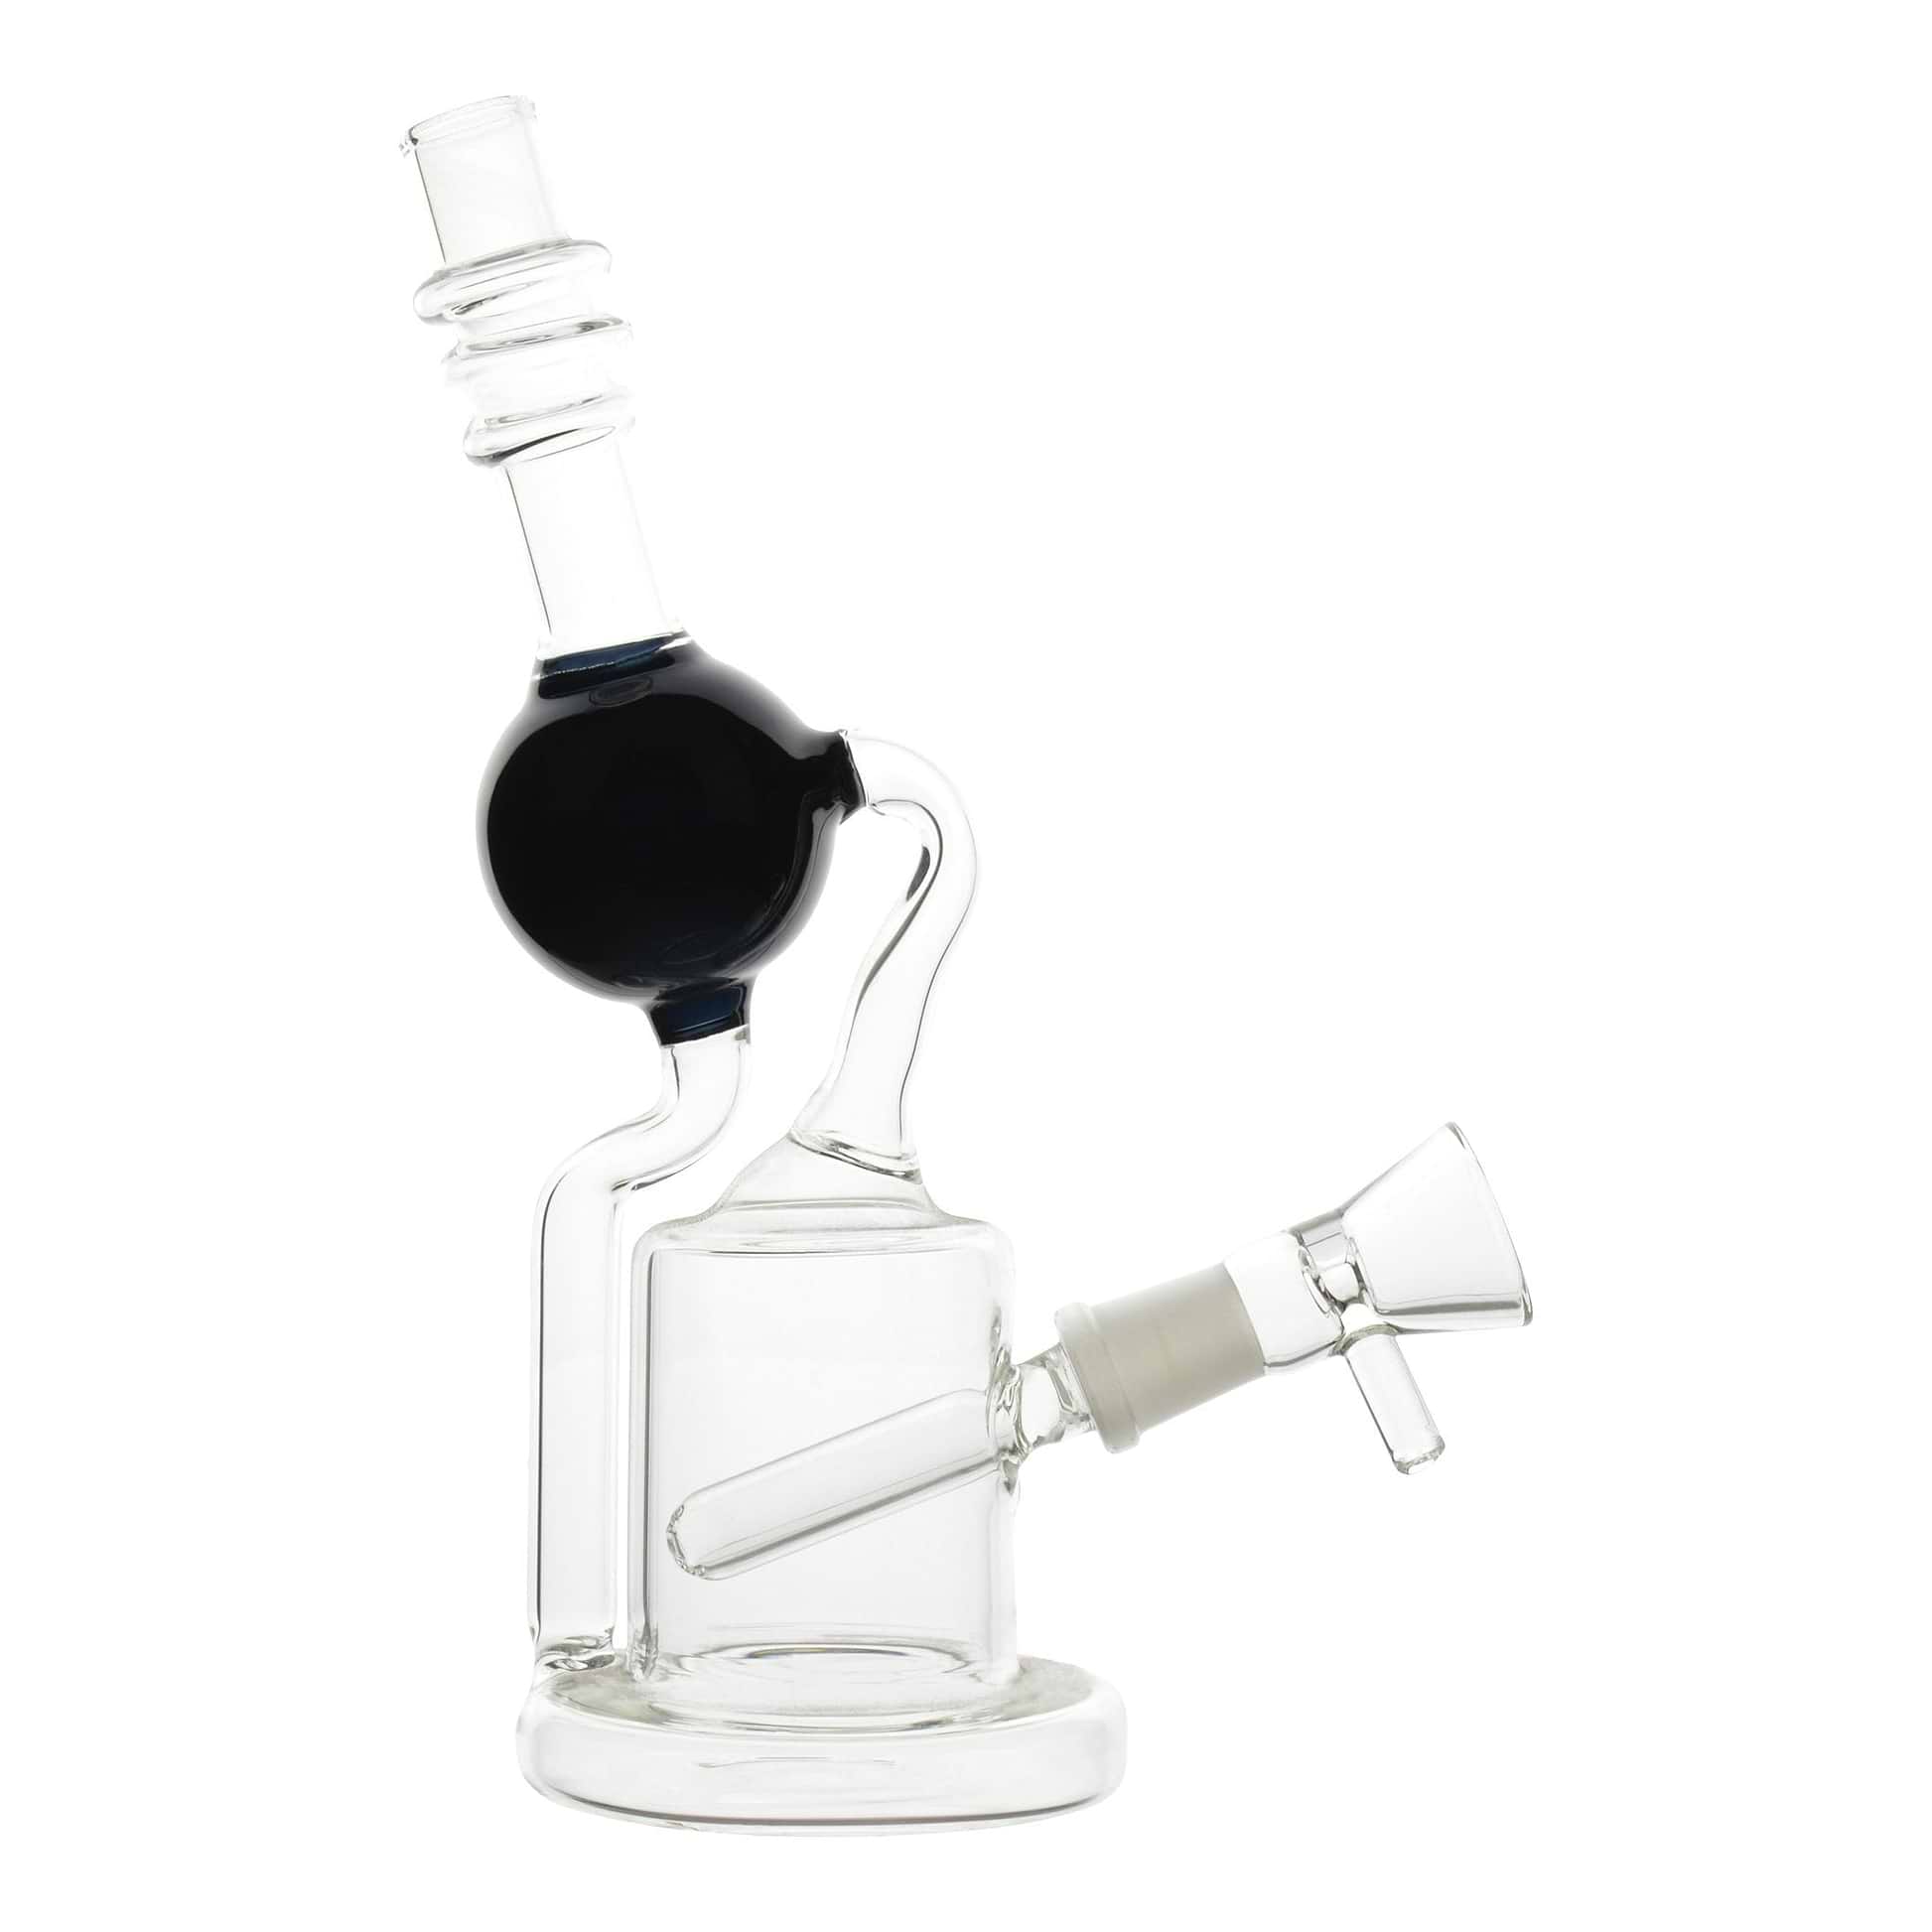 Full body shot of 9-inch glass black hole inspired bong smoking device black accents mouthpiece tilted left